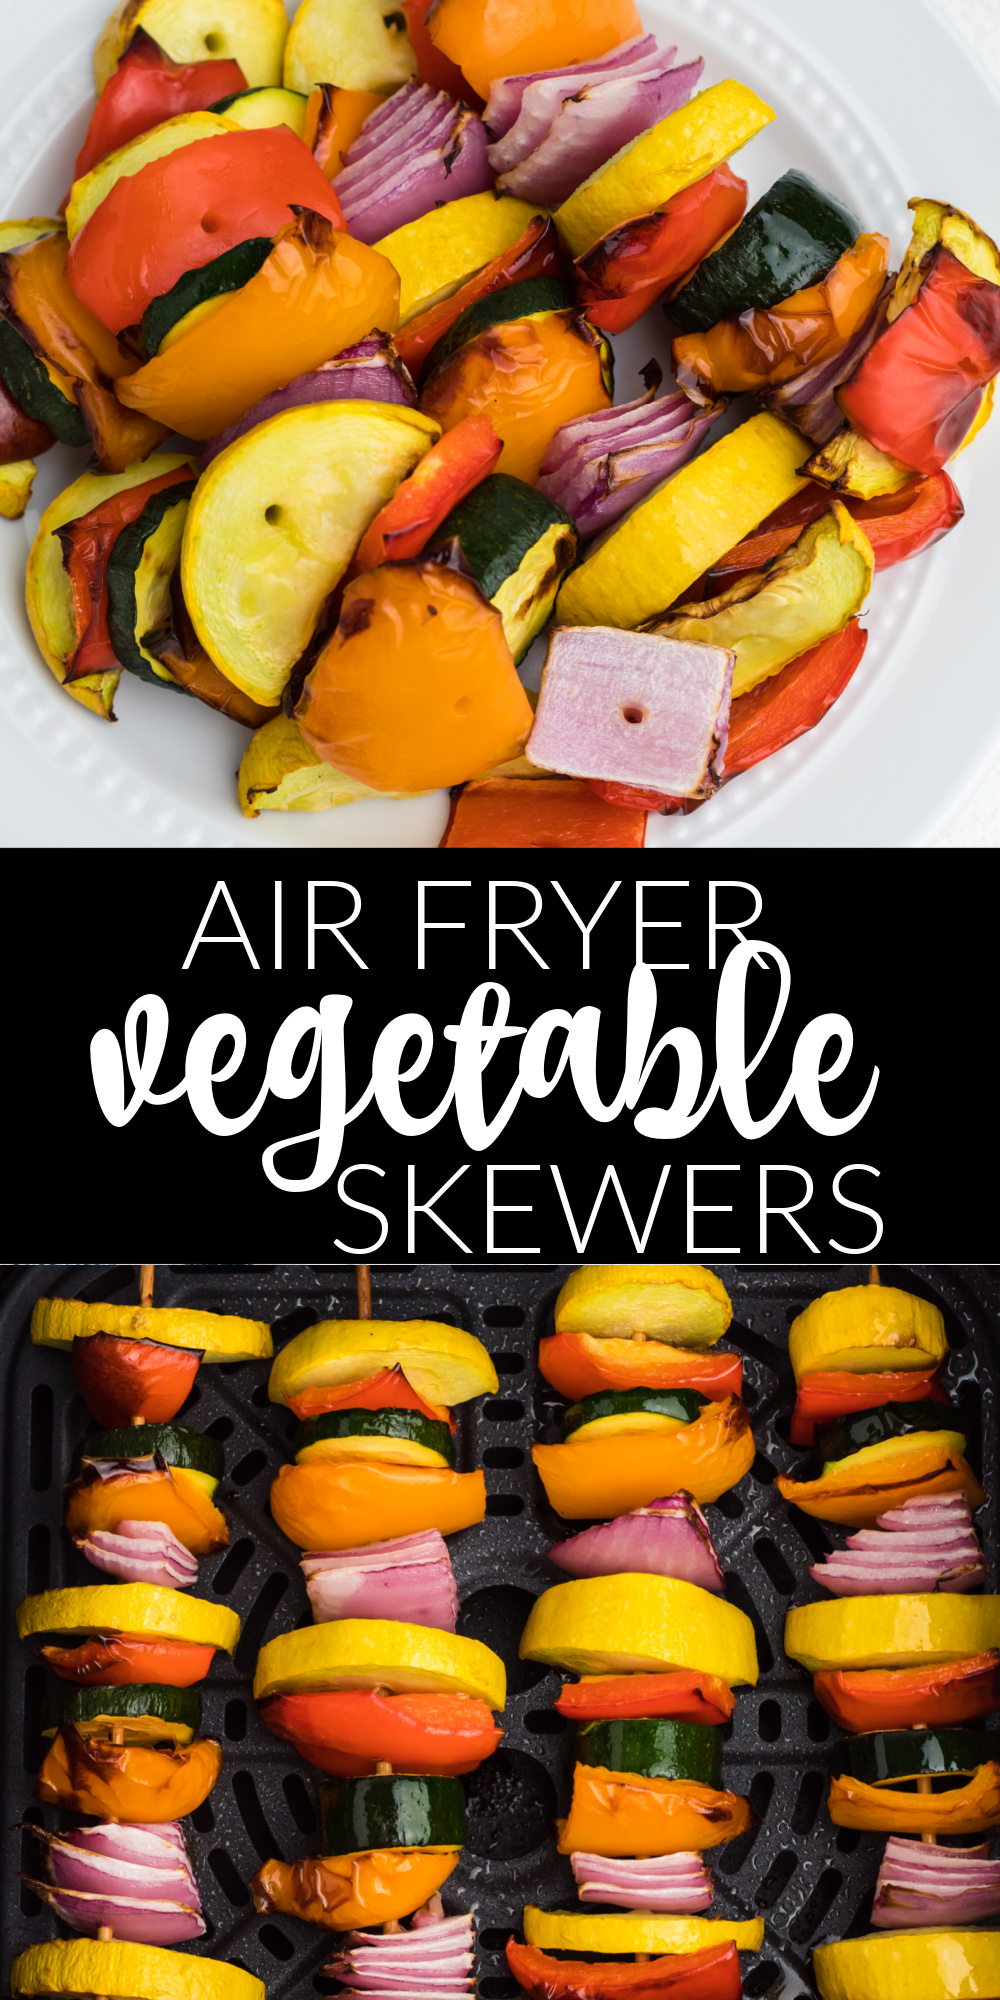 Vegetable skewers in the air fryer are one of my favorite ways to get that 